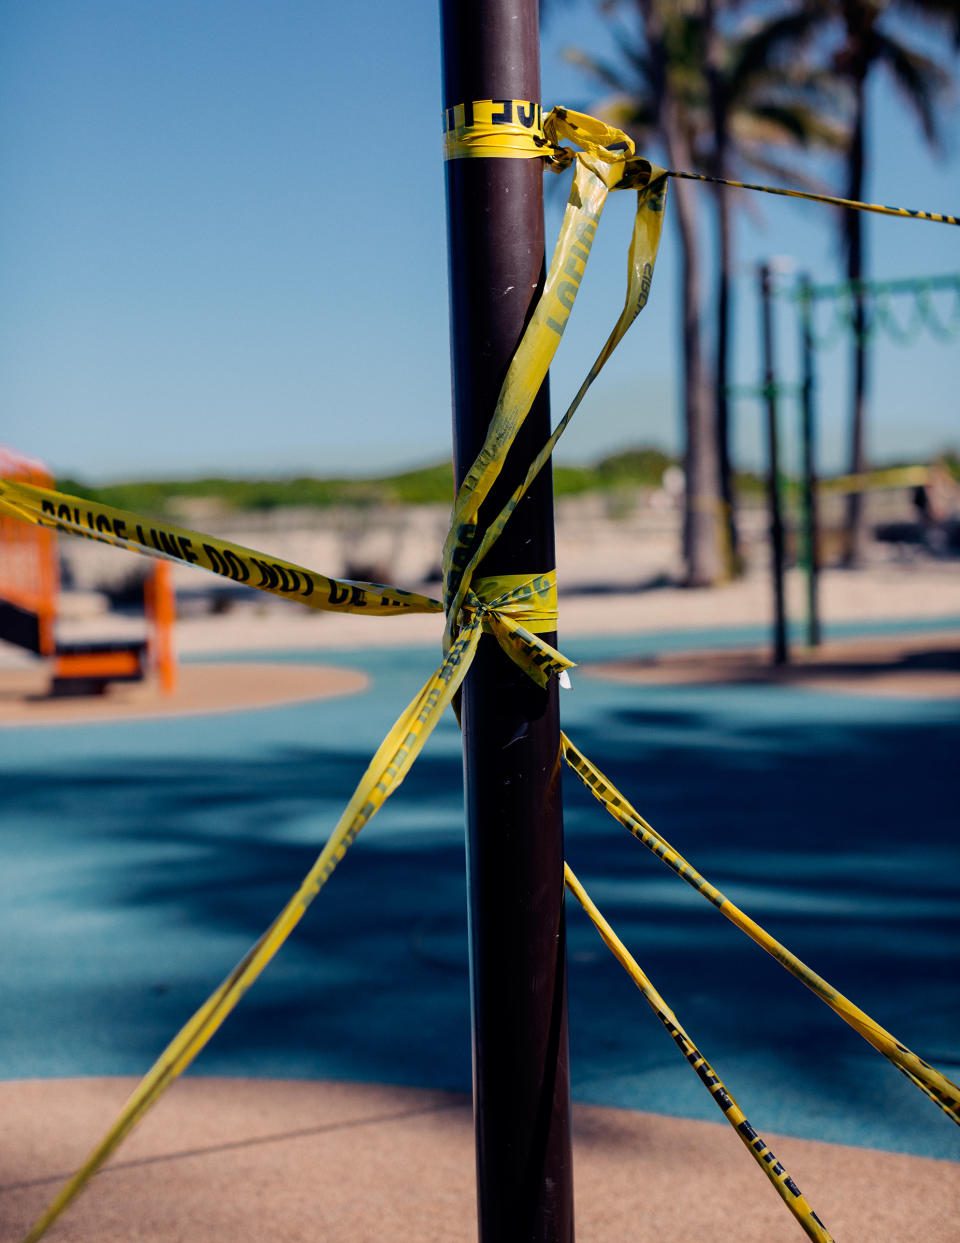 A playground in front of the temporarily closed Betsy Hotel is covered in caution tape as parks remain closed in Miami Beach. | Rose Marie Cromwell for TIME